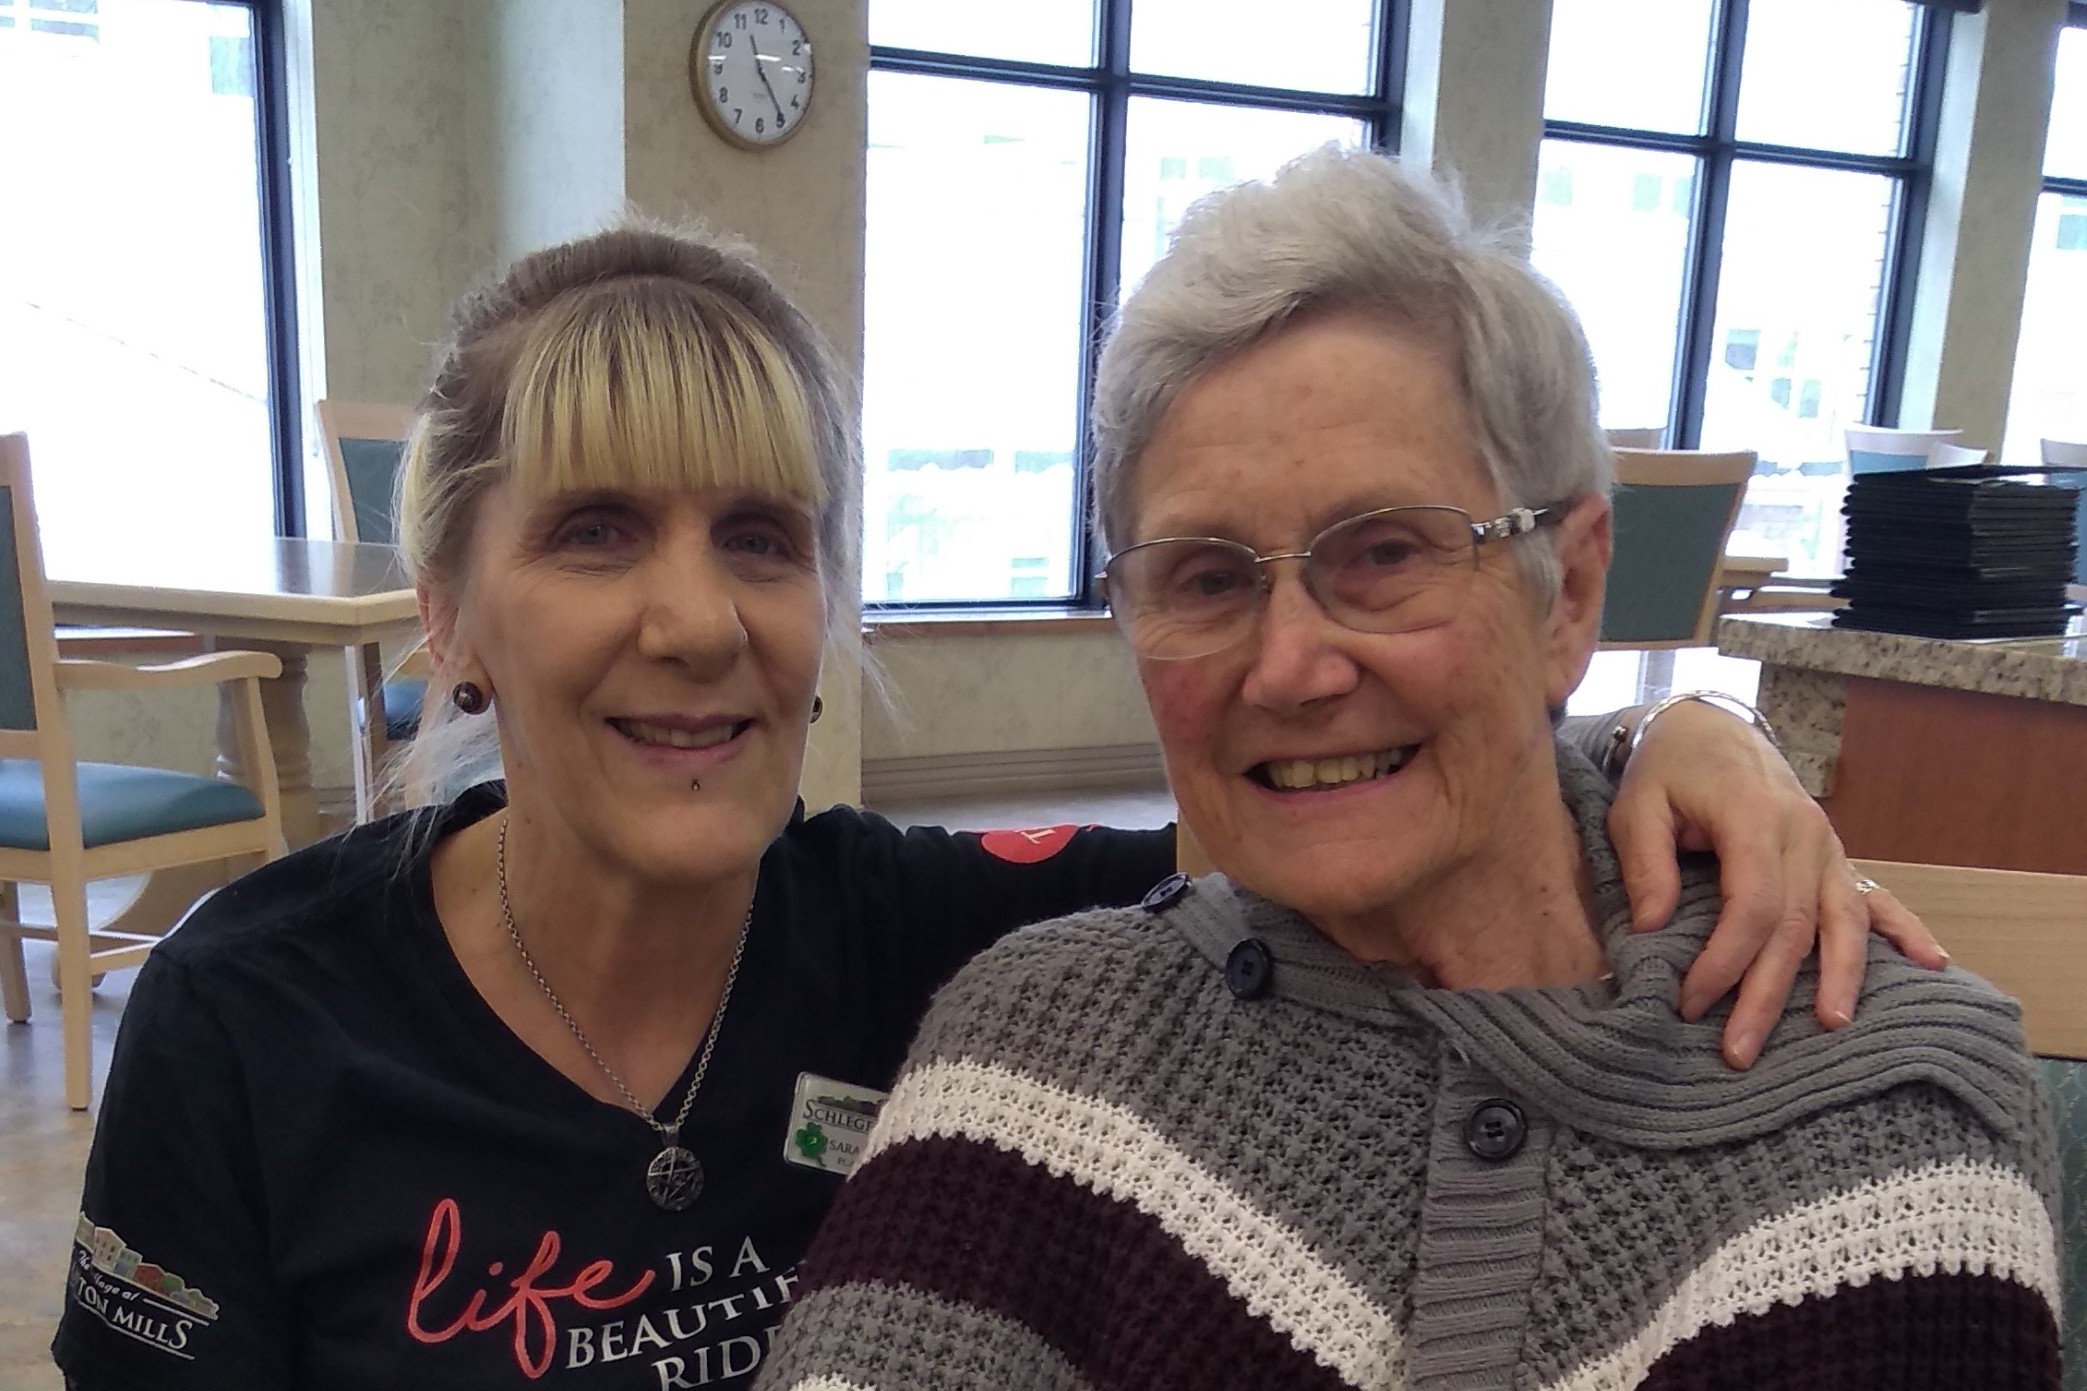 Sara is one of the team members supporting residents  like Valerie in the new Emma's neighbourhood at Taunton  Mills. LIVING In My Today teaches that taking the time to truly know each resident is the key to successful support. 